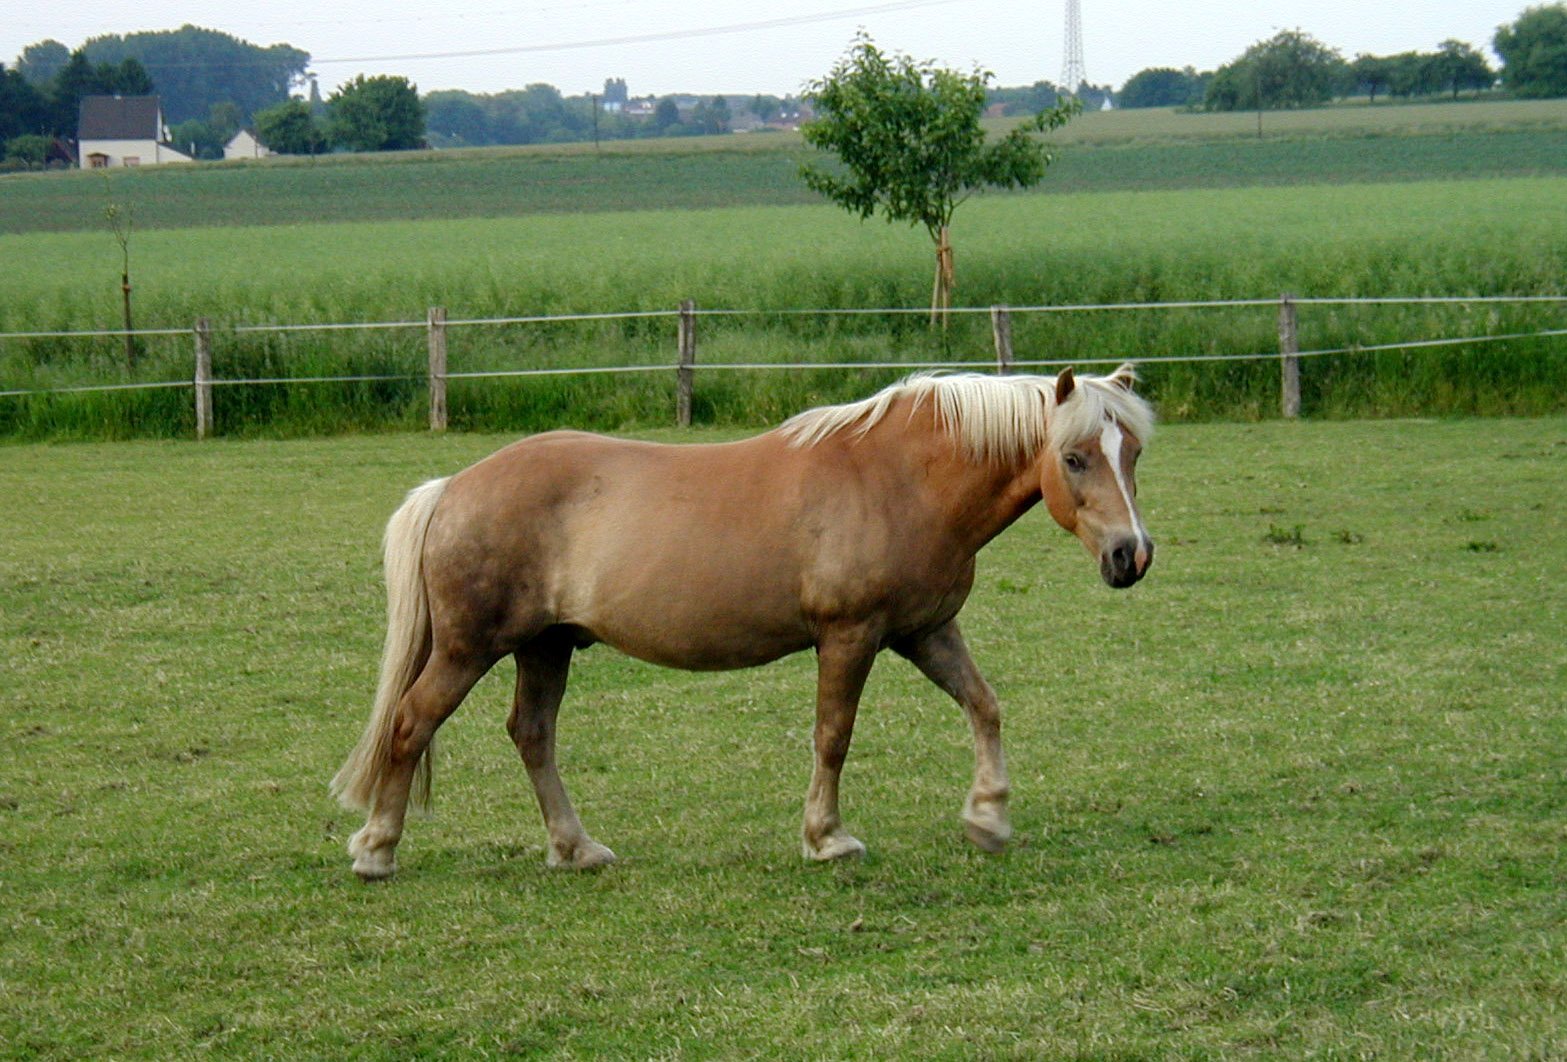 a horse in a field grazing on grass